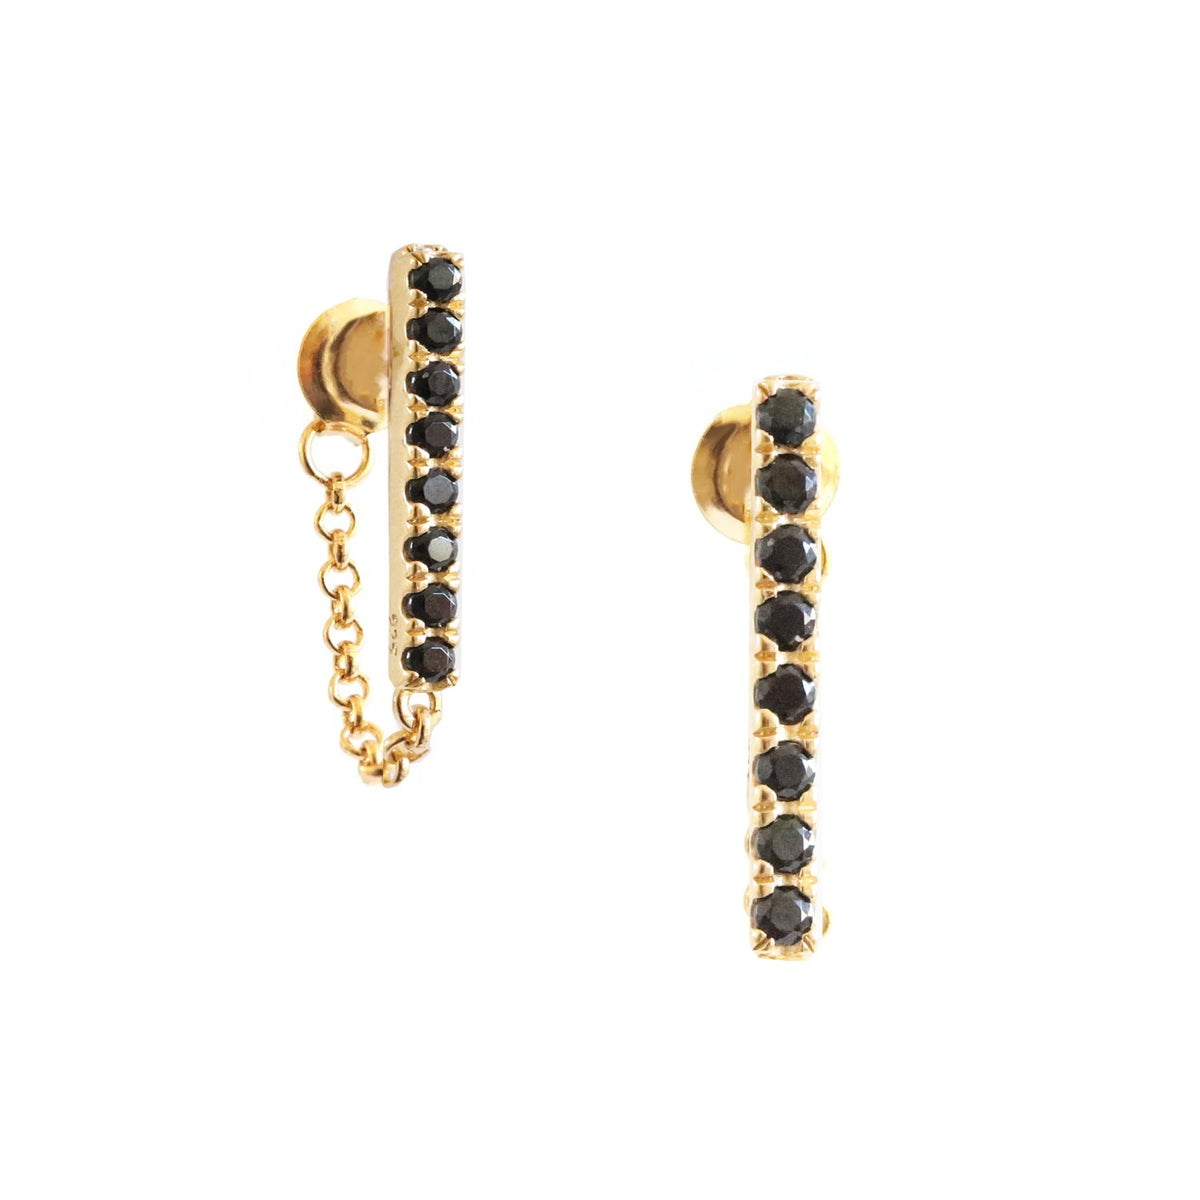 DAY 7 - LOVE BAR EARRNGS - BLACK ONYX &amp; GOLD - SO PRETTY CARA COTTER